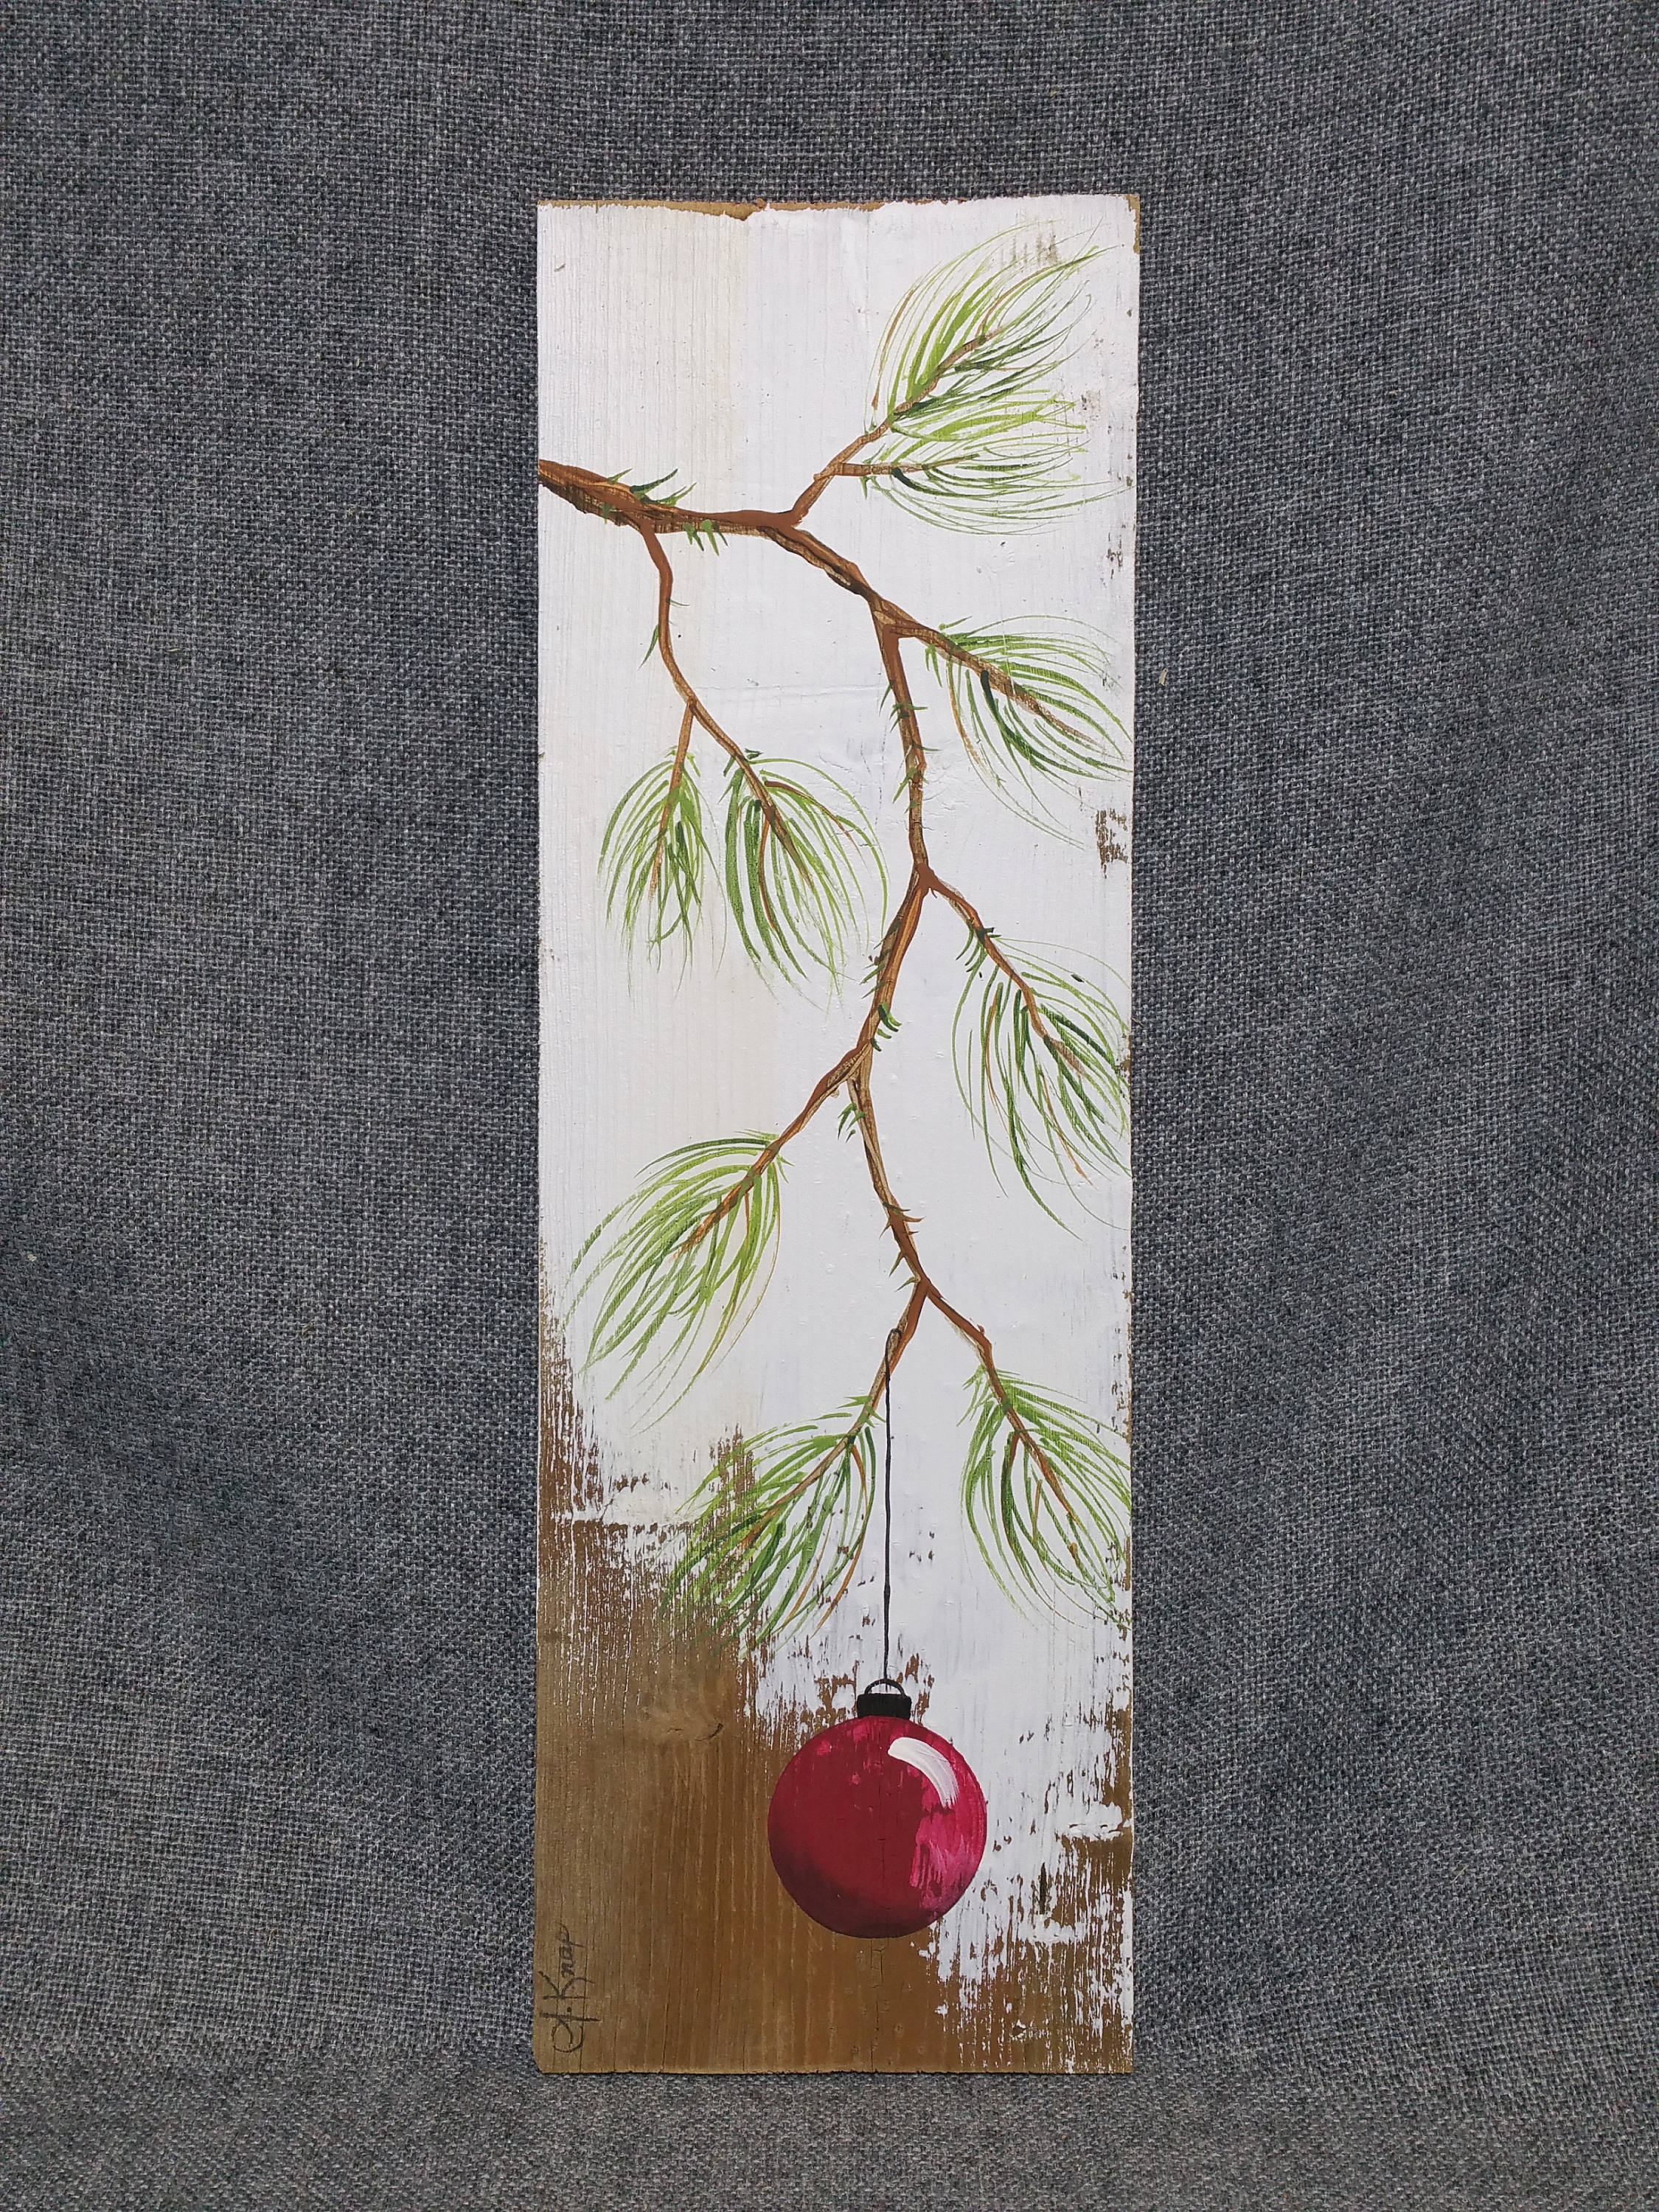 Red Christmas decoration, Hand painted Pine Branch with RED Bulb, Farmhouse white washed decor